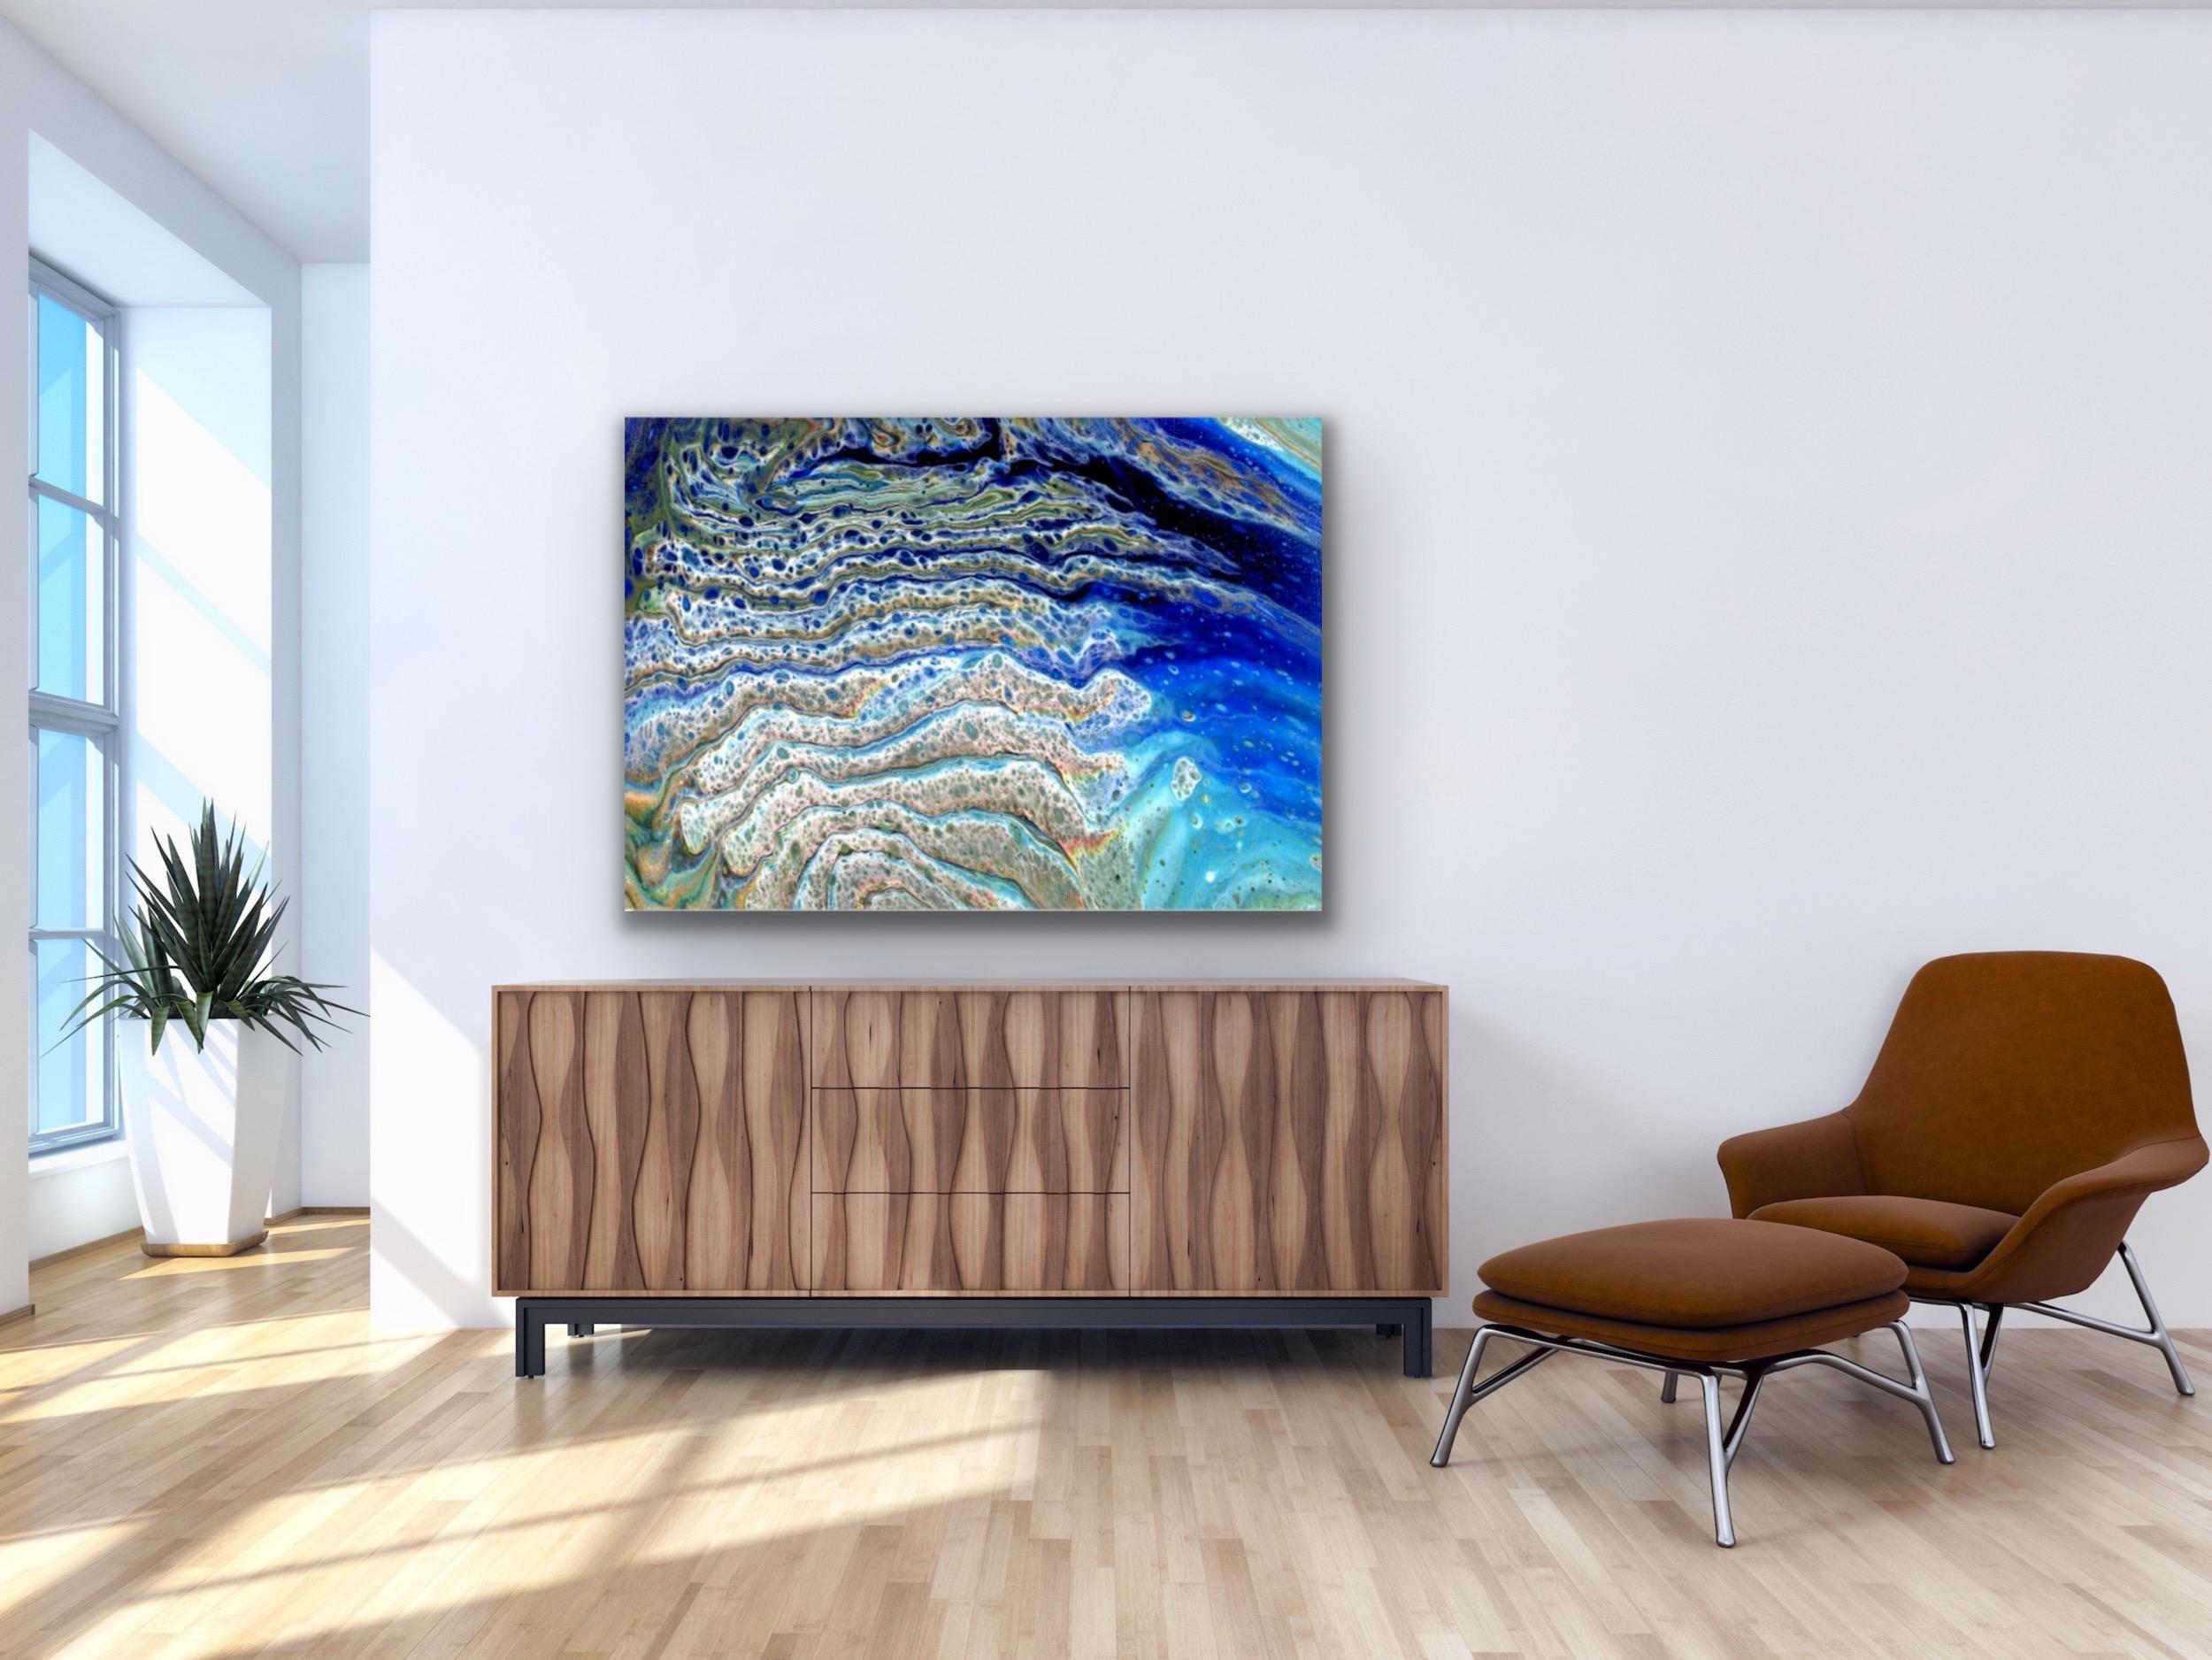 Large Contemporary Abstract Painting, Modern Giclee Print on Metal, by Cessy  1